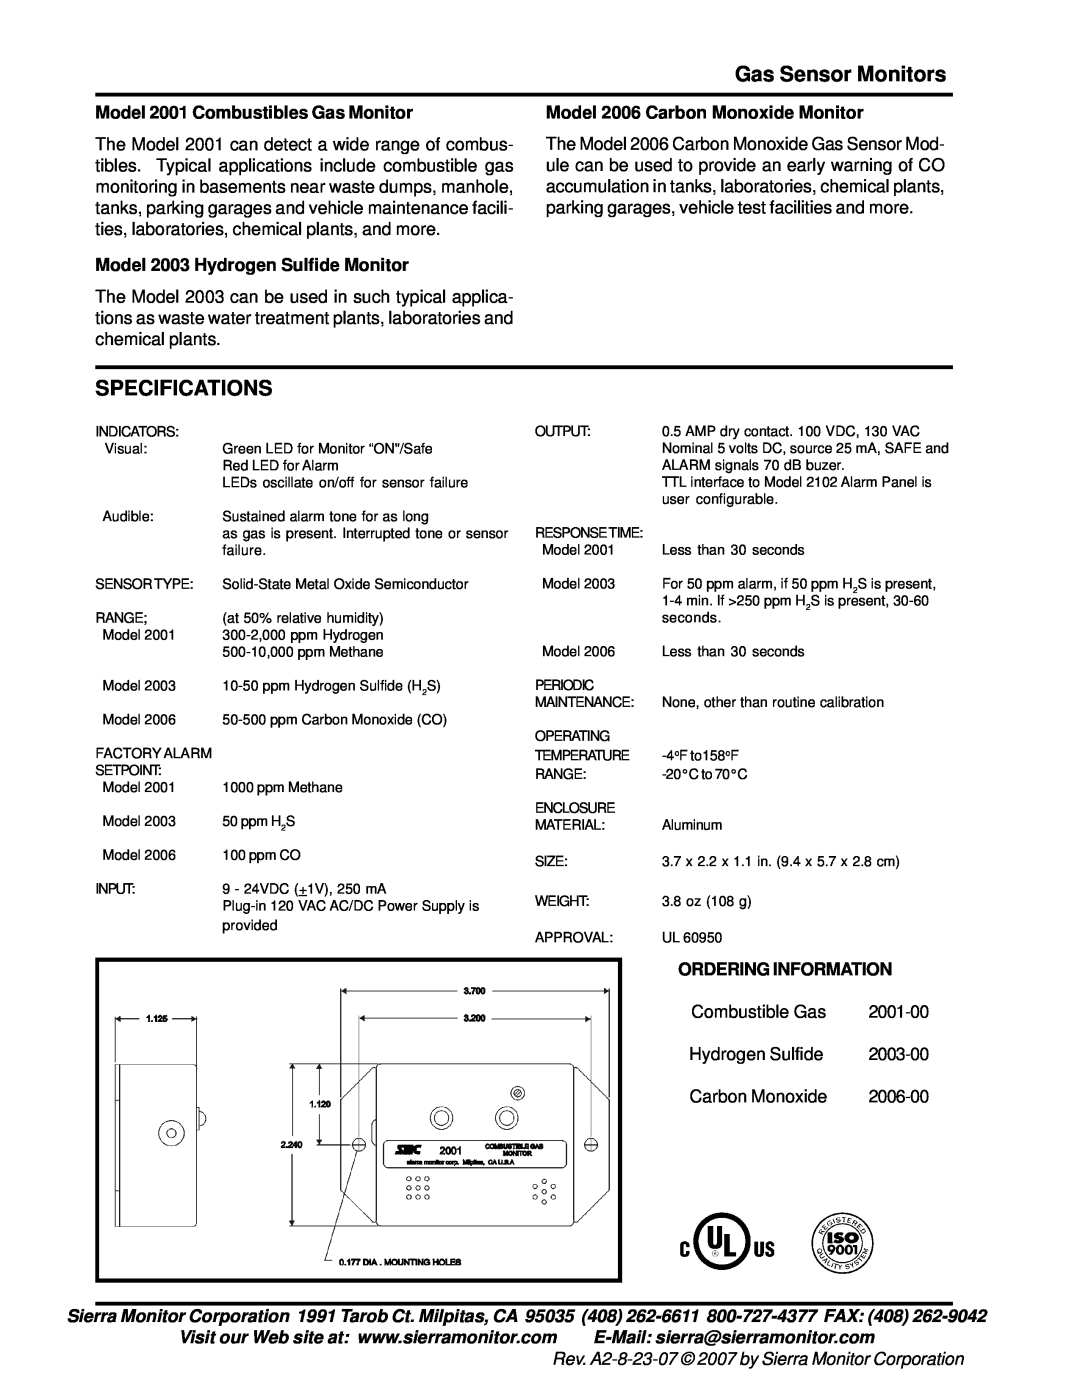 Sierra Monitor Corporation 2006 Model 2001 Combustibles Gas Monitor, Model 2003 Hydrogen Sulfide Monitor, Specifications 